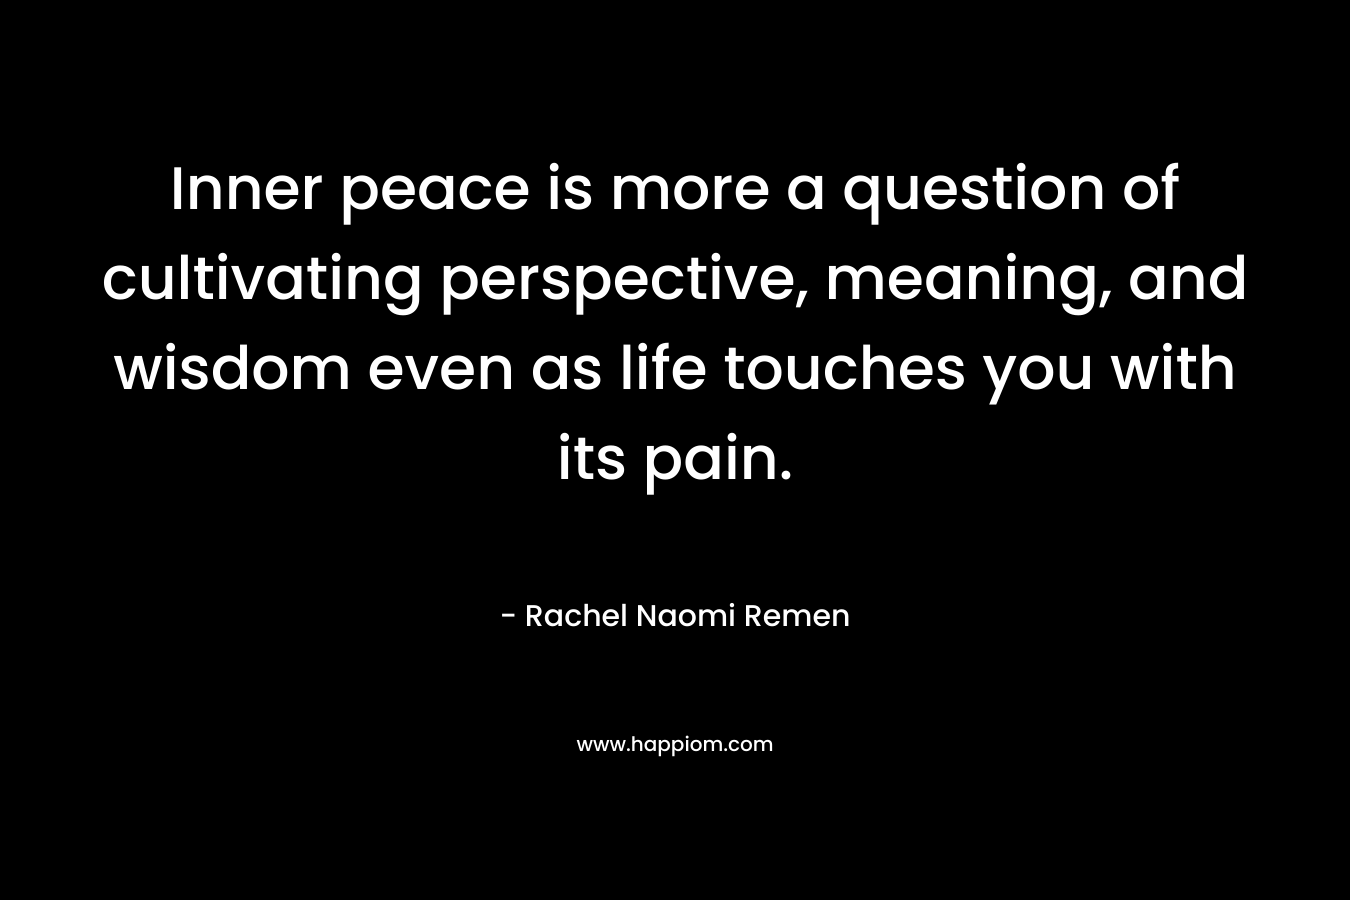 Inner peace is more a question of cultivating perspective, meaning, and wisdom even as life touches you with its pain. – Rachel Naomi Remen